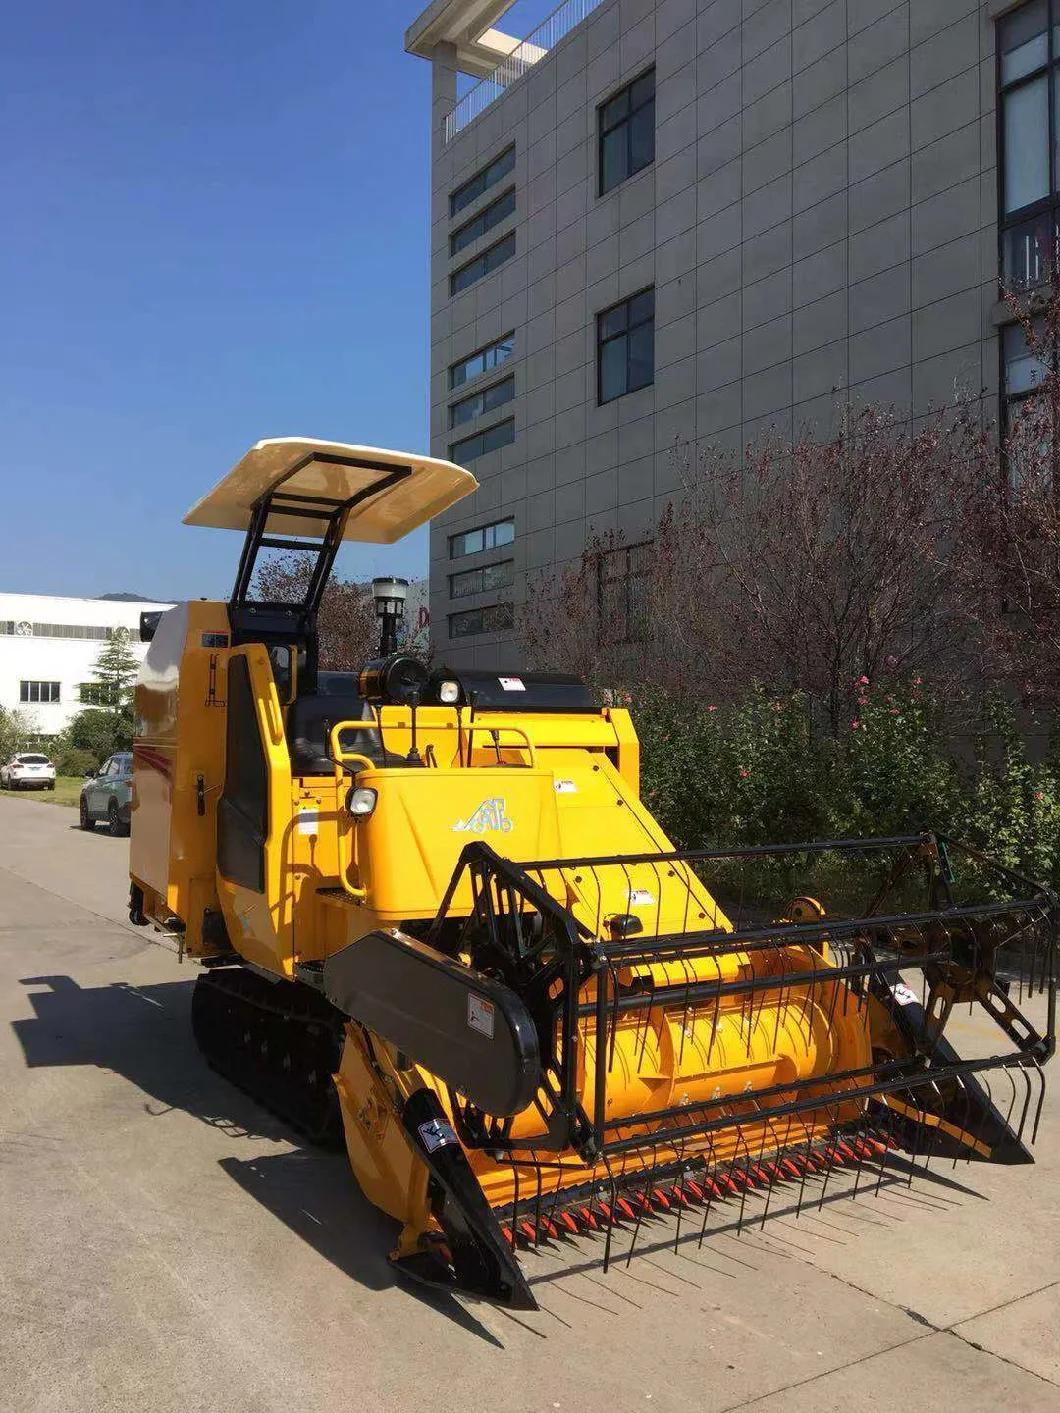 China Manufacturer Wheat and Rice Harvester Price Best High Quality